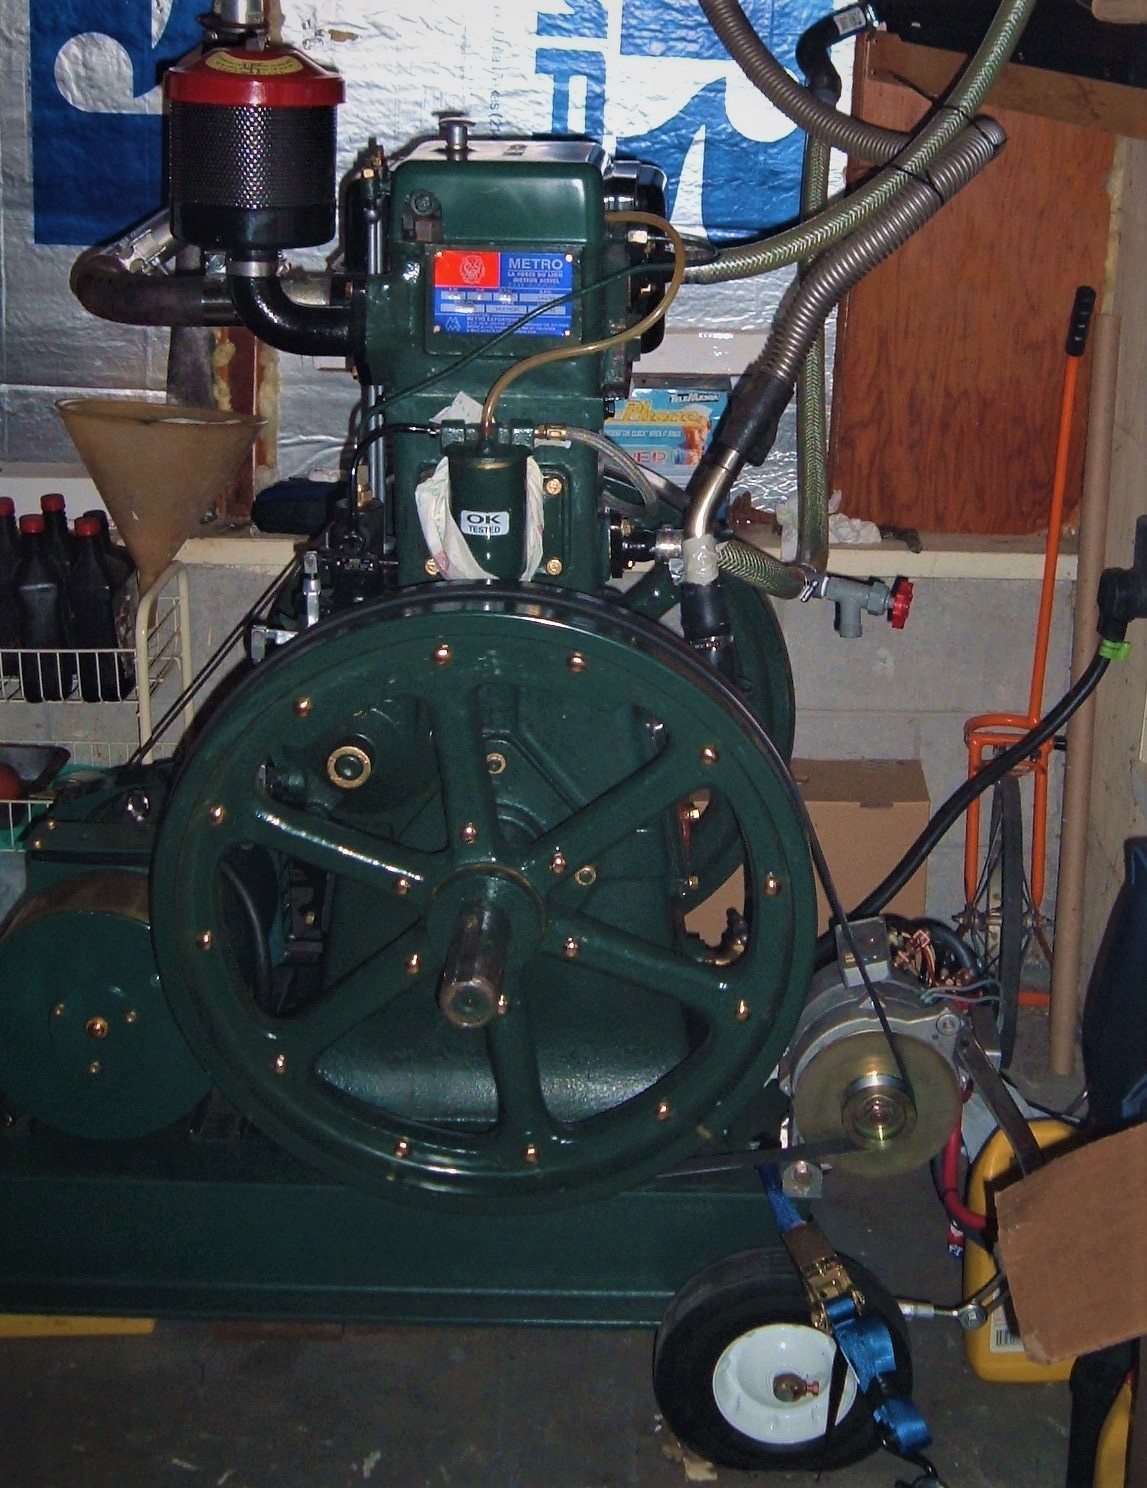 Assembled Lister stlye generator with DC Welder mounted